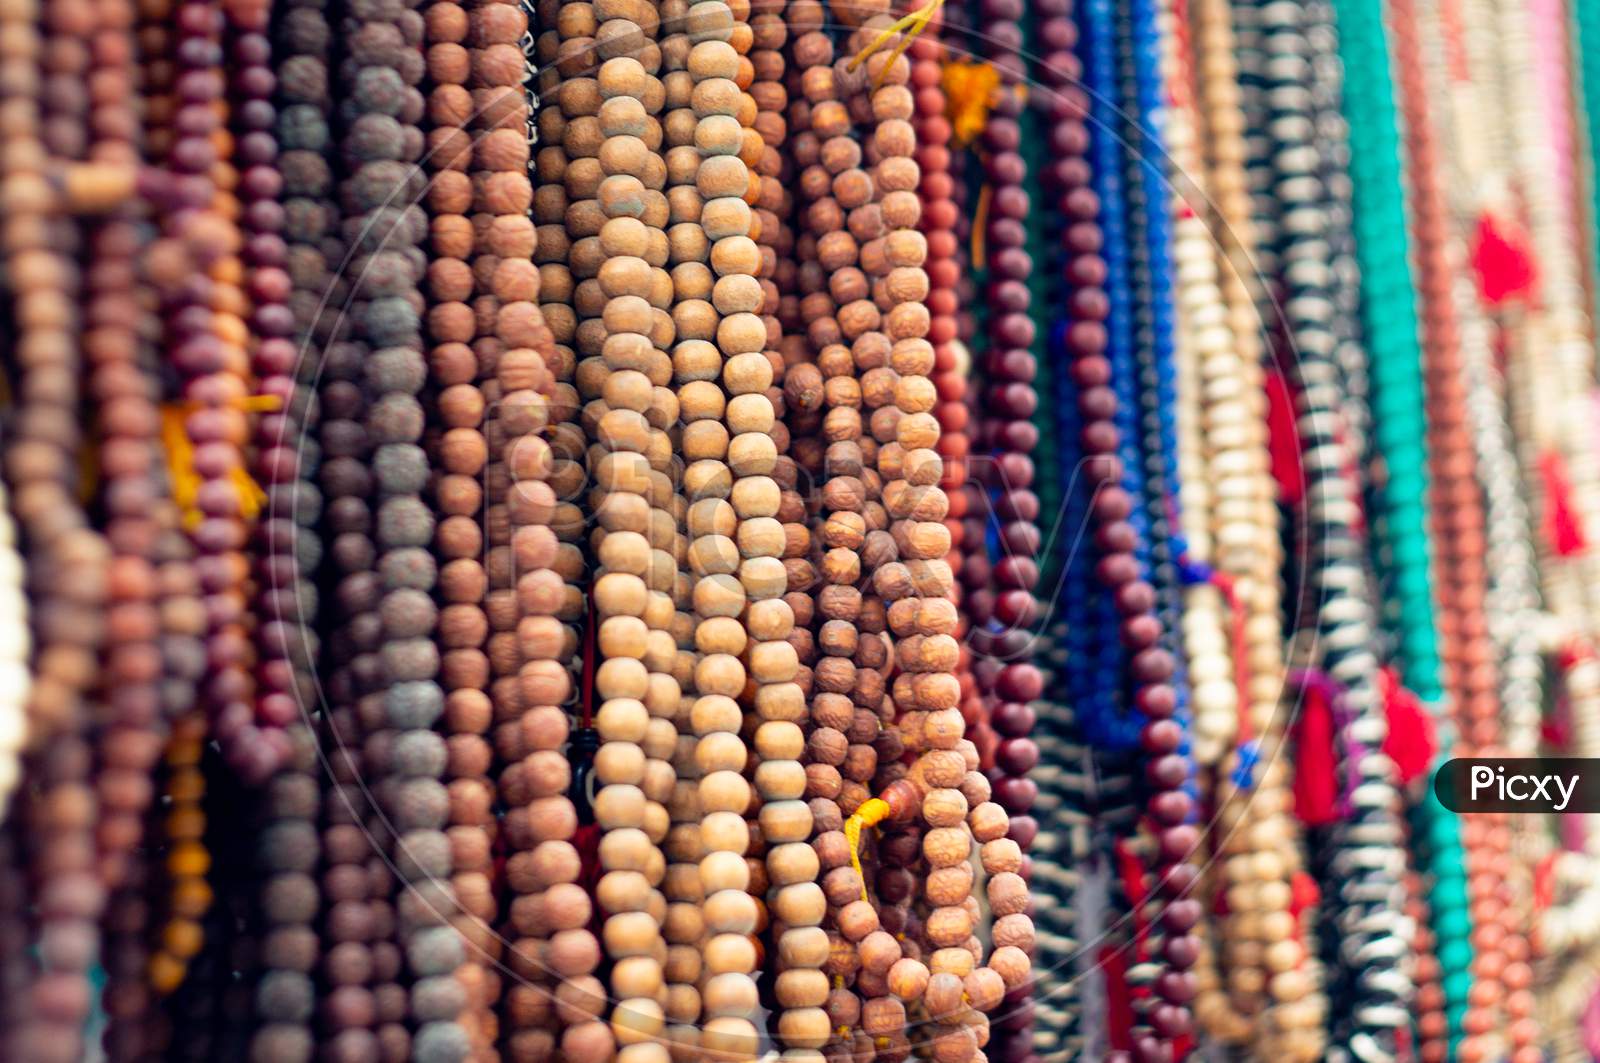 Wooden Prayer Worry Beads On String Used As A Way To Reduce Stress And Relax Sold In An Open Shop As A Tourist Attraction Near Hinduism Buddhism Temple